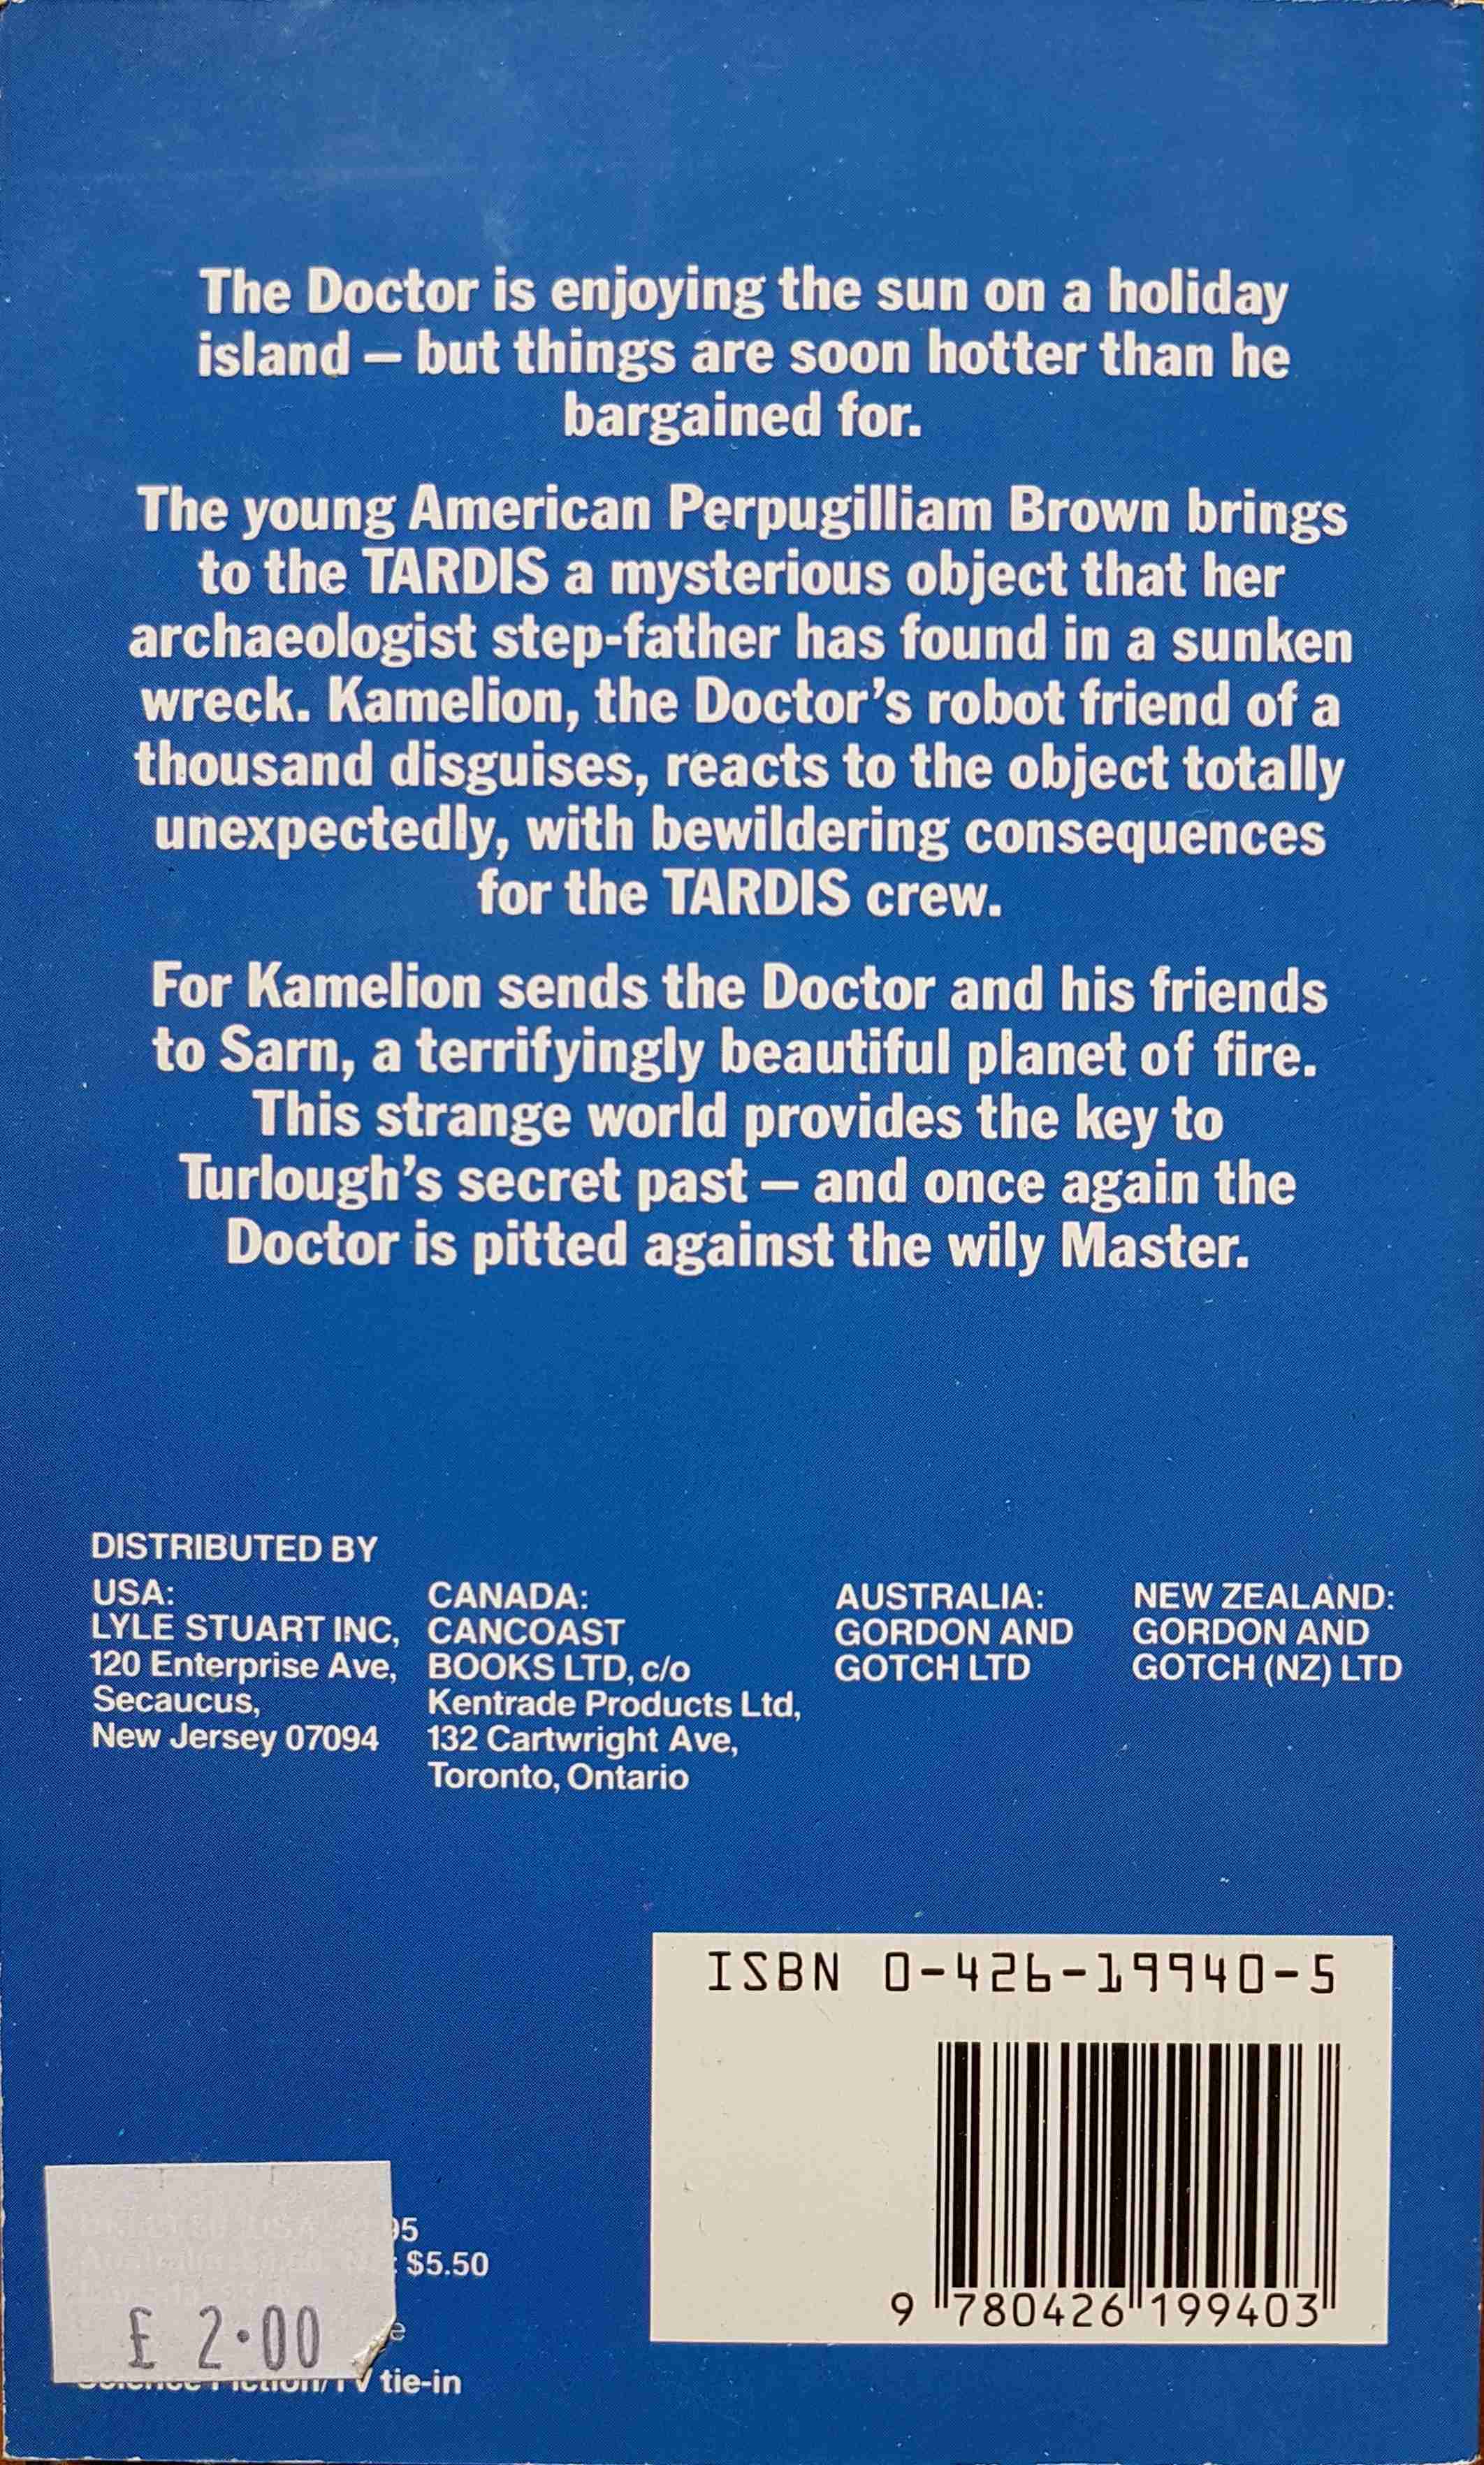 Back cover of 0-426-19940-5